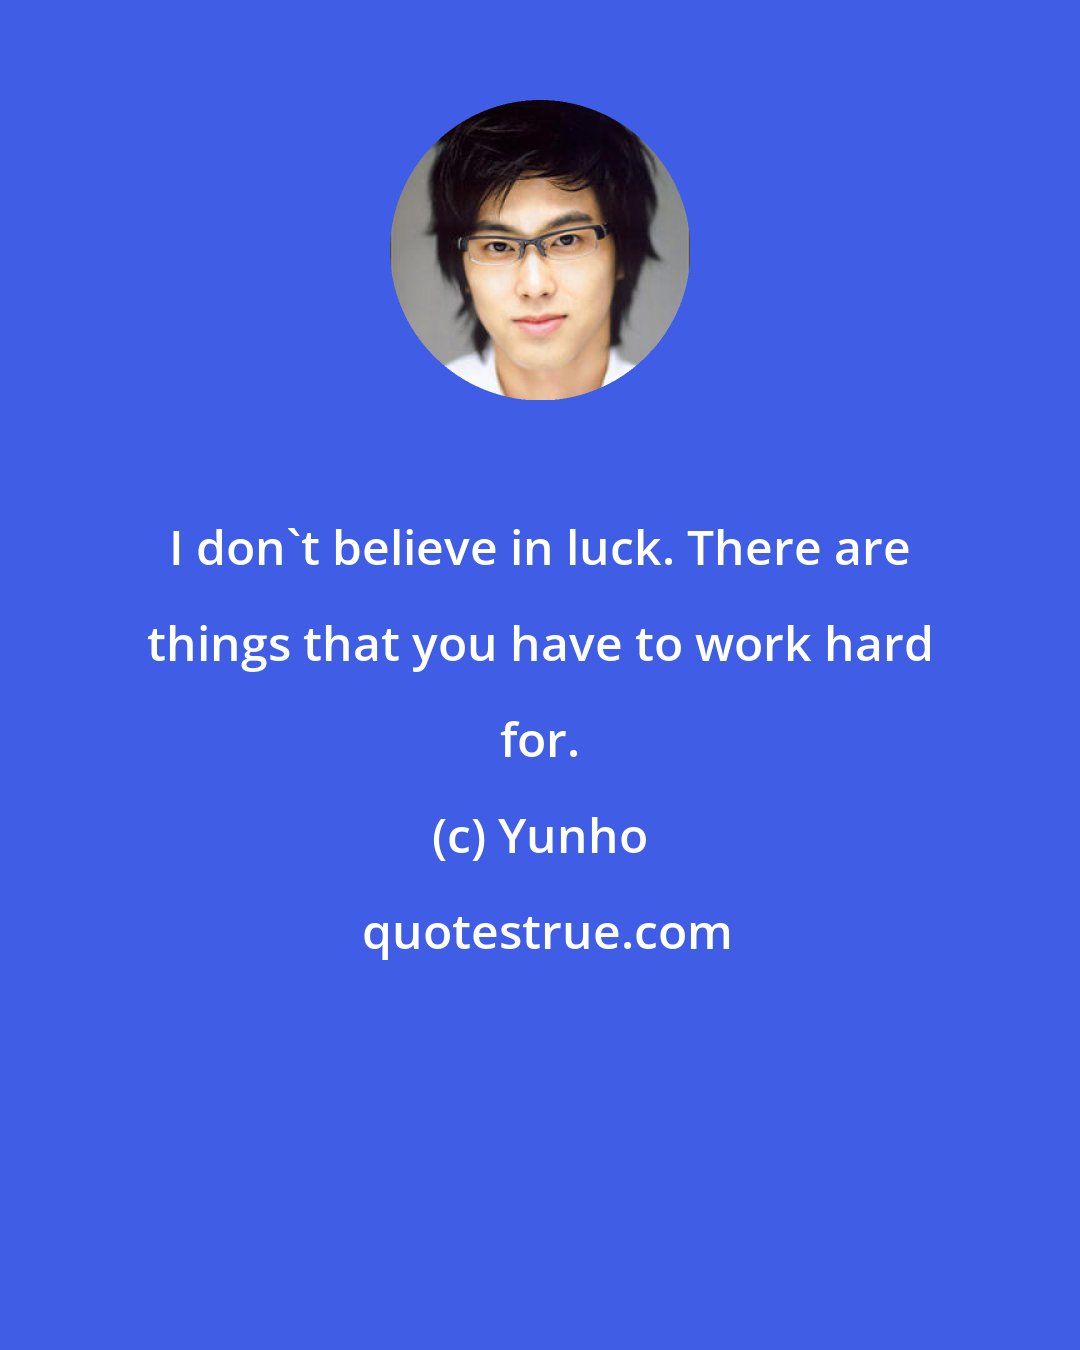 Yunho: I don't believe in luck. There are things that you have to work hard for.